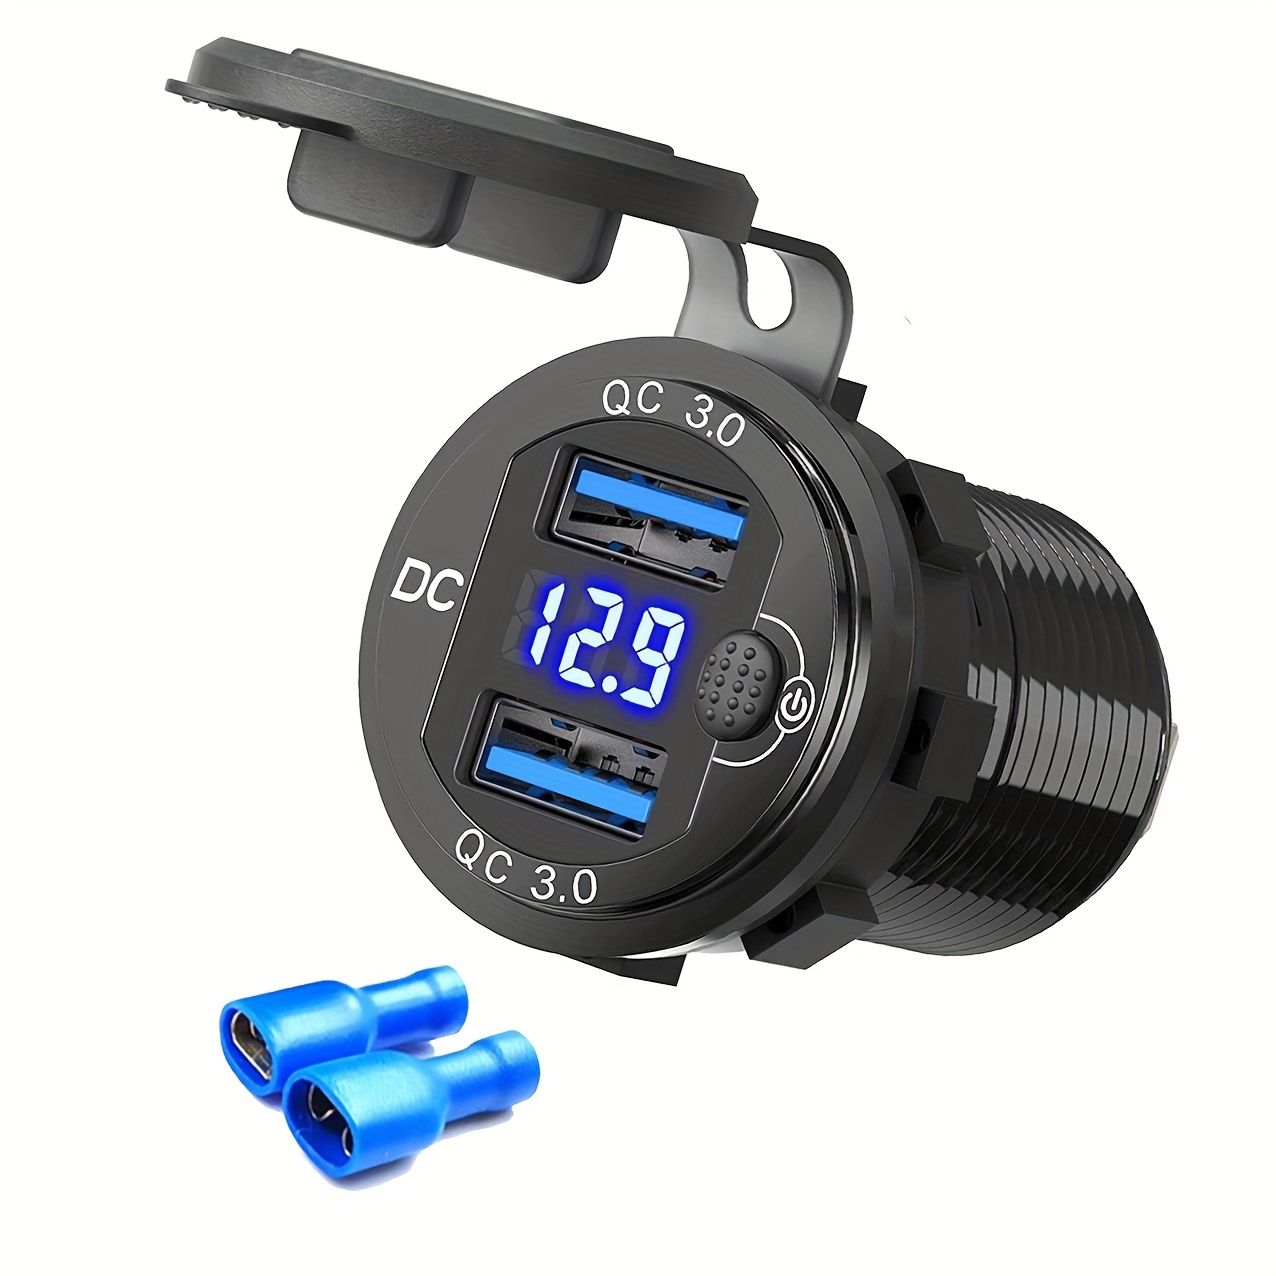 

Dual Usb Car Phone Charger Car Modification With Switch Led Digital Voltmeter Waterproof Aluminium Alloy Housing